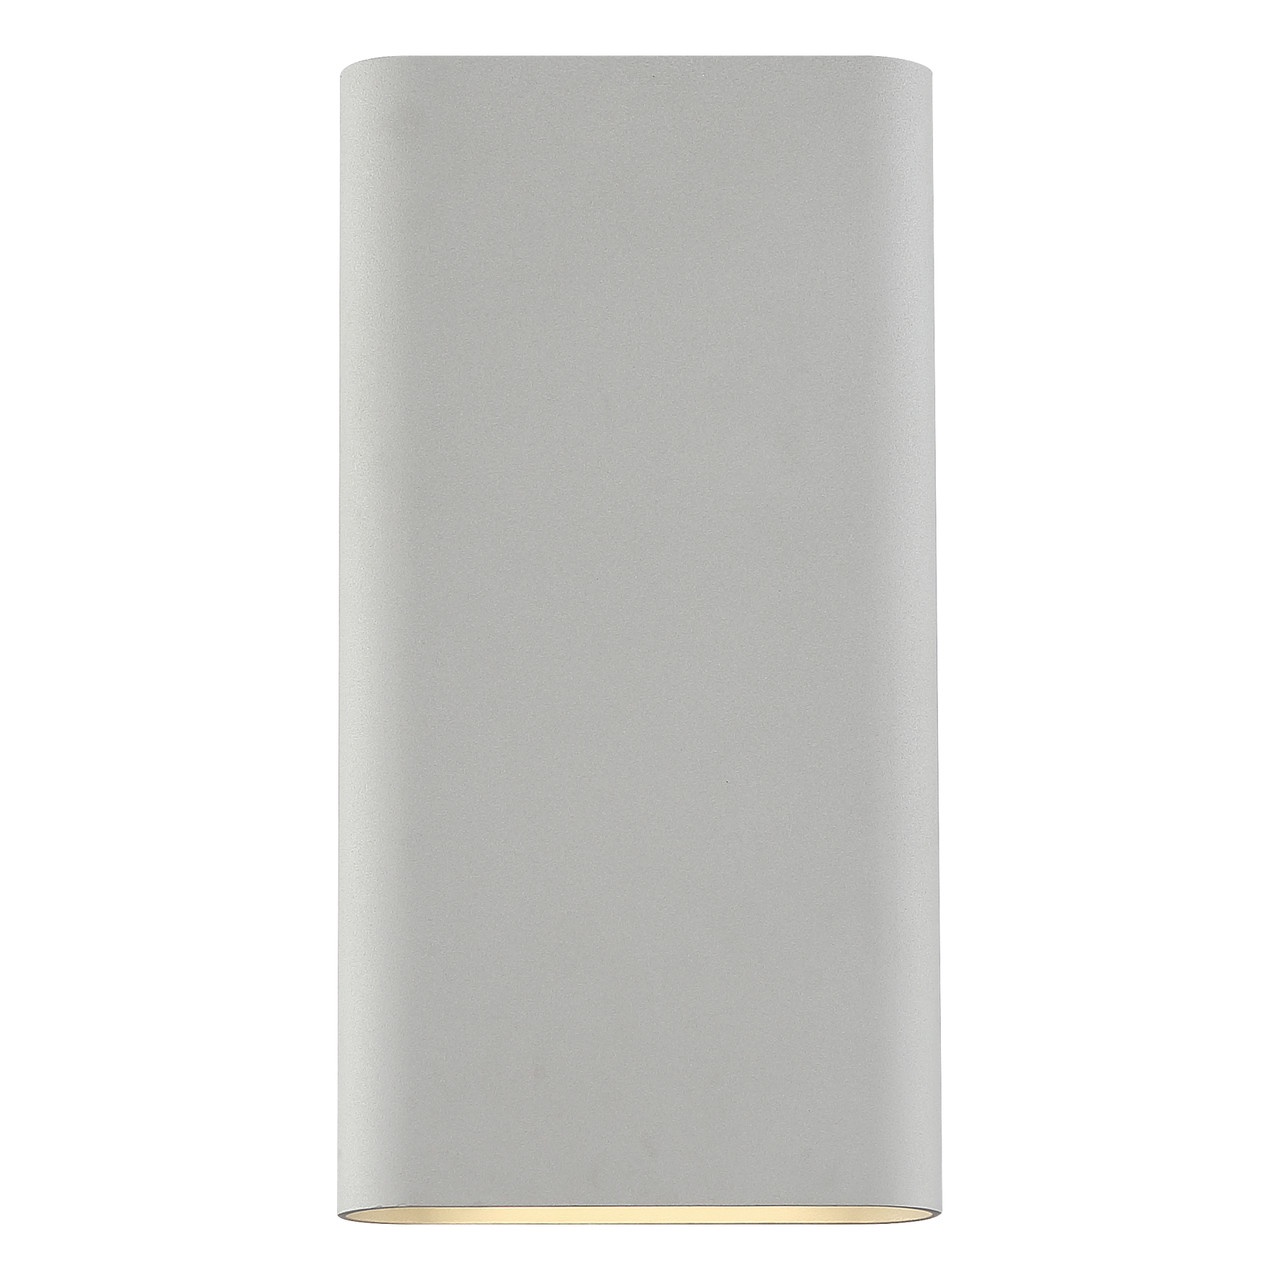 ACCESS LIGHTING 20409LEDD-SAT Lux 120-277v Dimmable Bi-Directional LED Wall Sconce